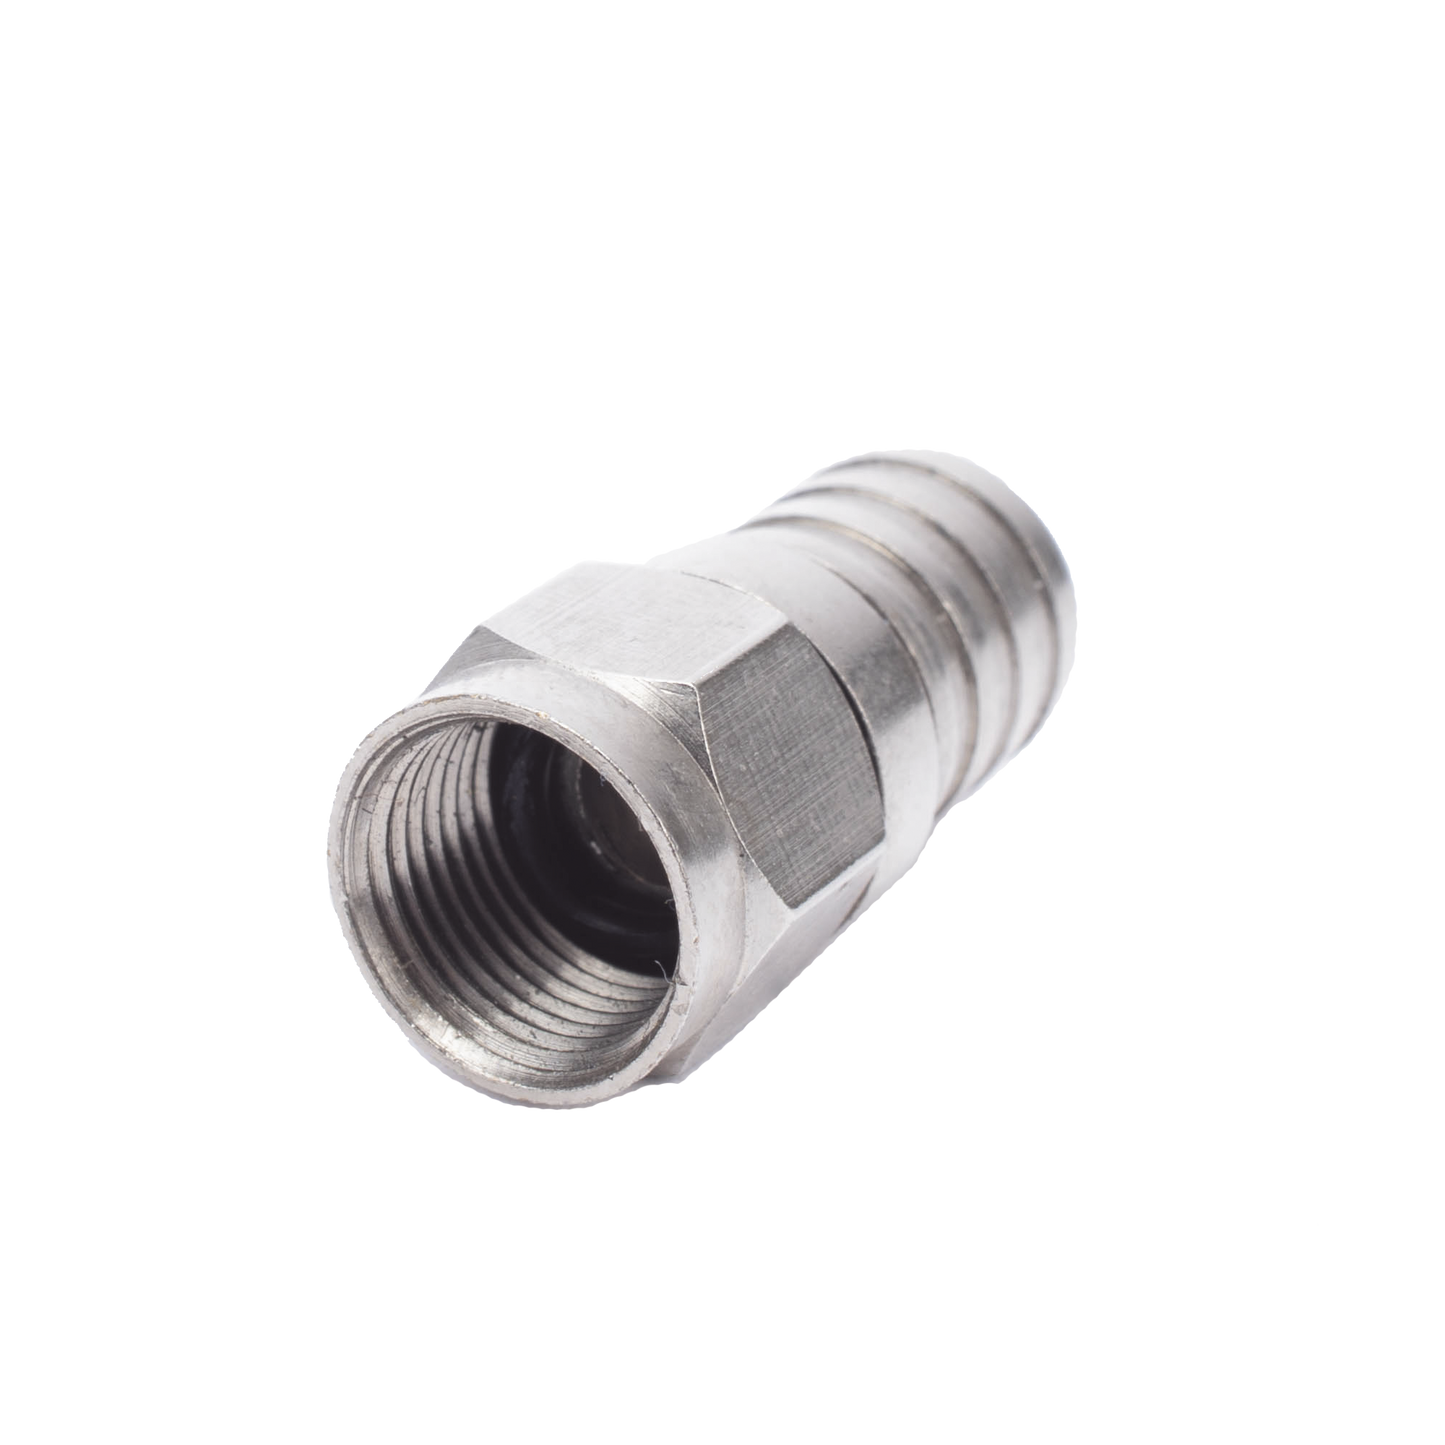 F Male Connector, 75 Ohm, to Crimp on RG-6/U cable, no pin, Nickel/Polyethylene.